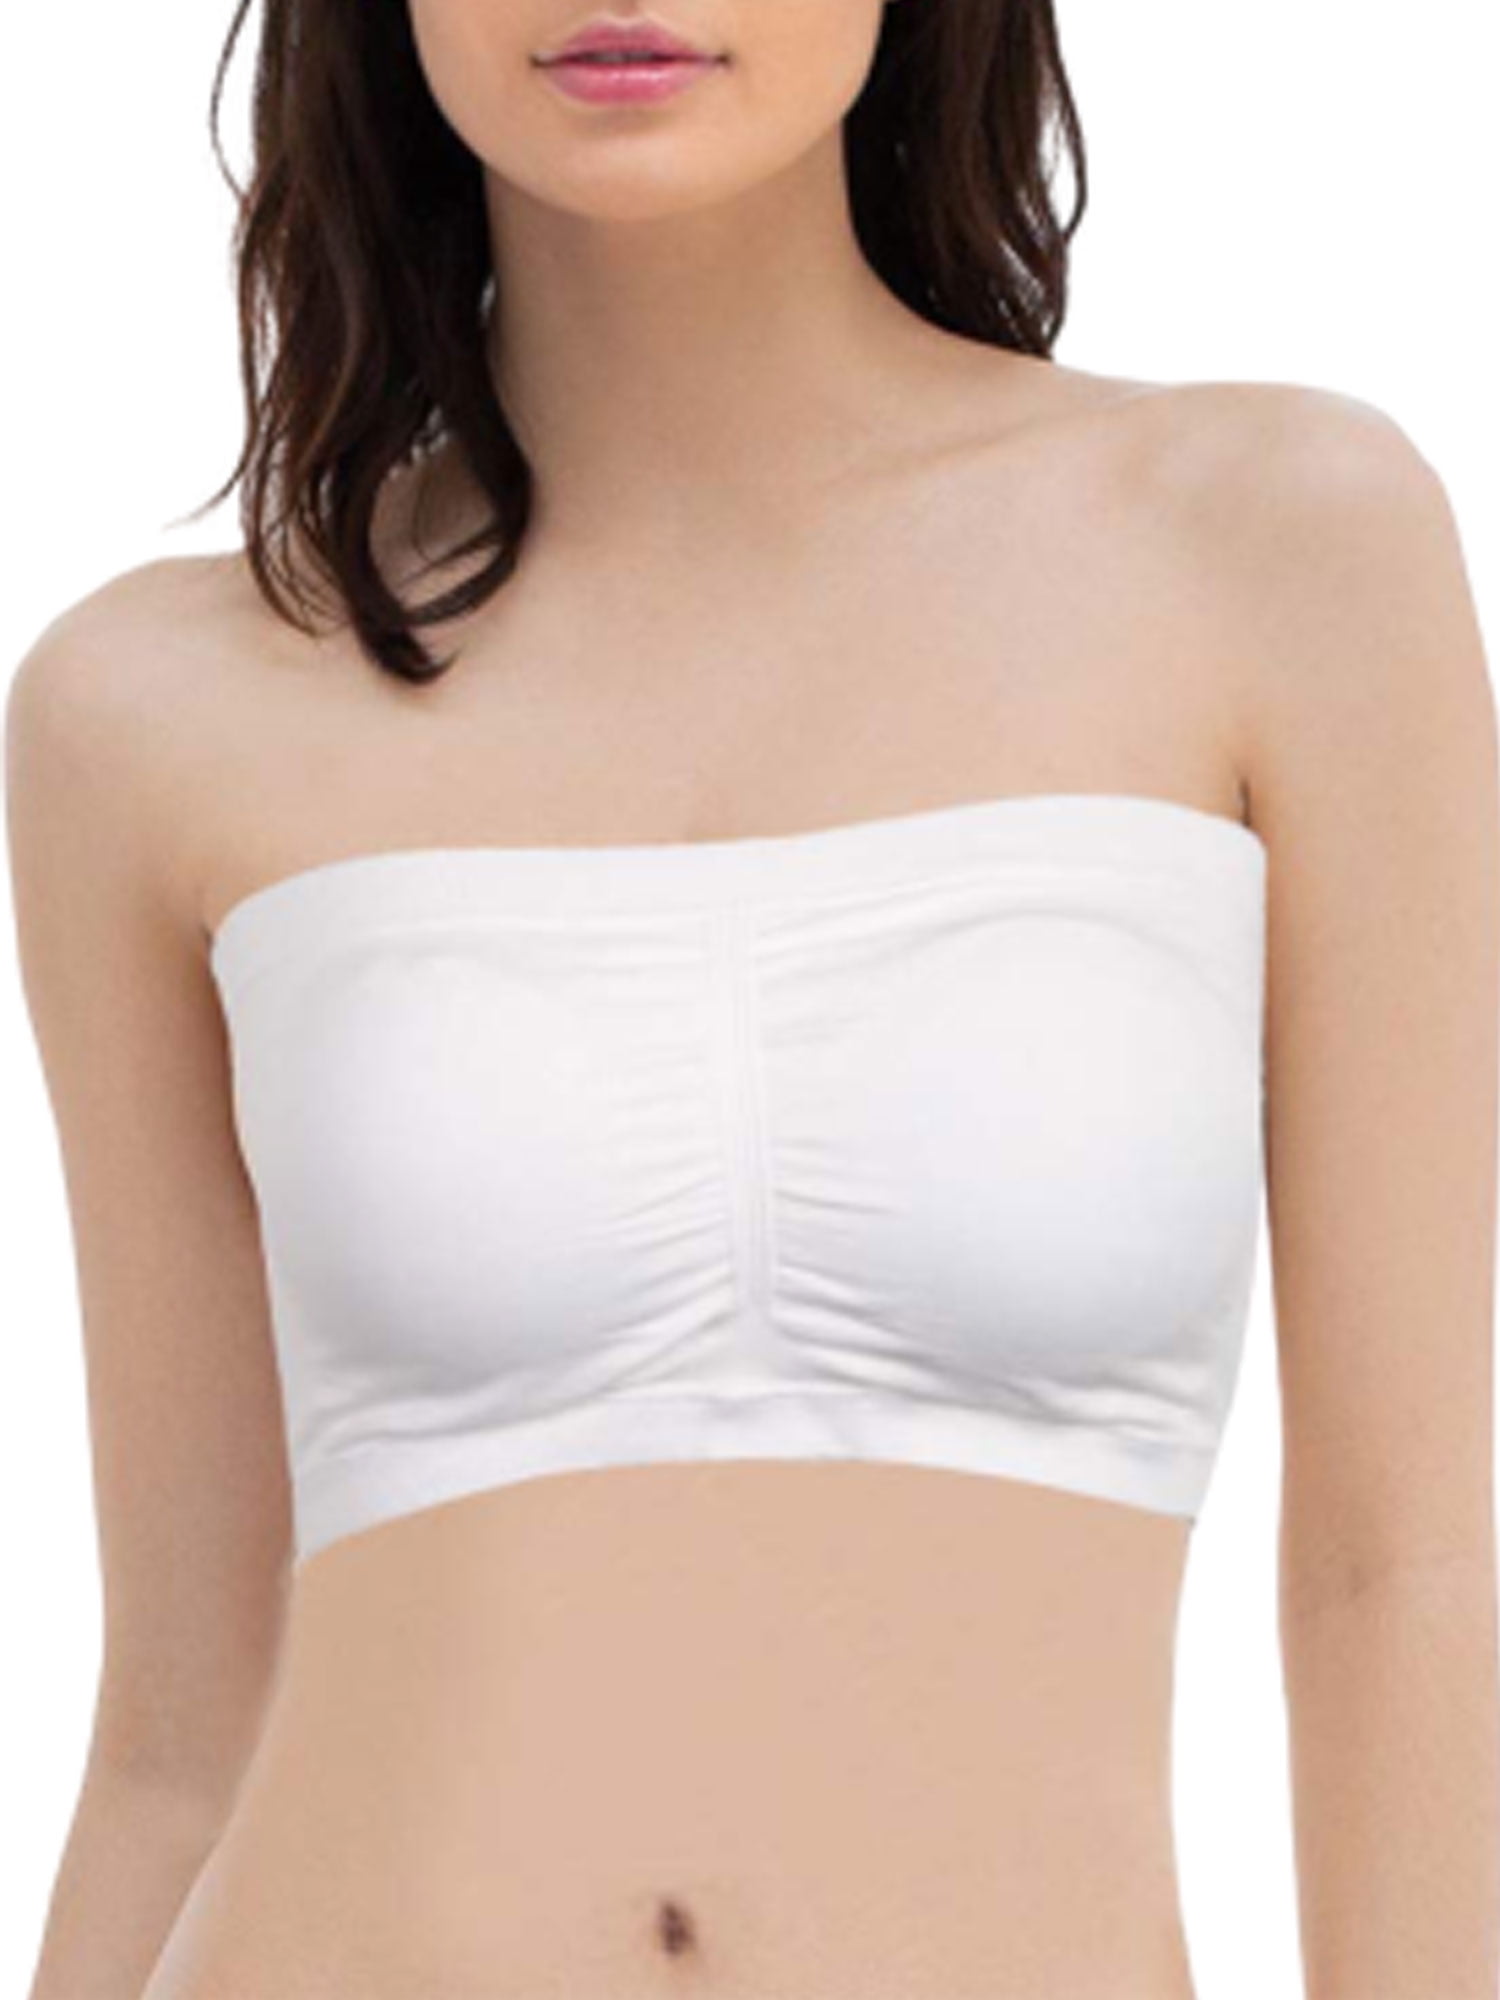 Suanret Plus Size Strapless Bra Bandeau Tube Removable Padded Top